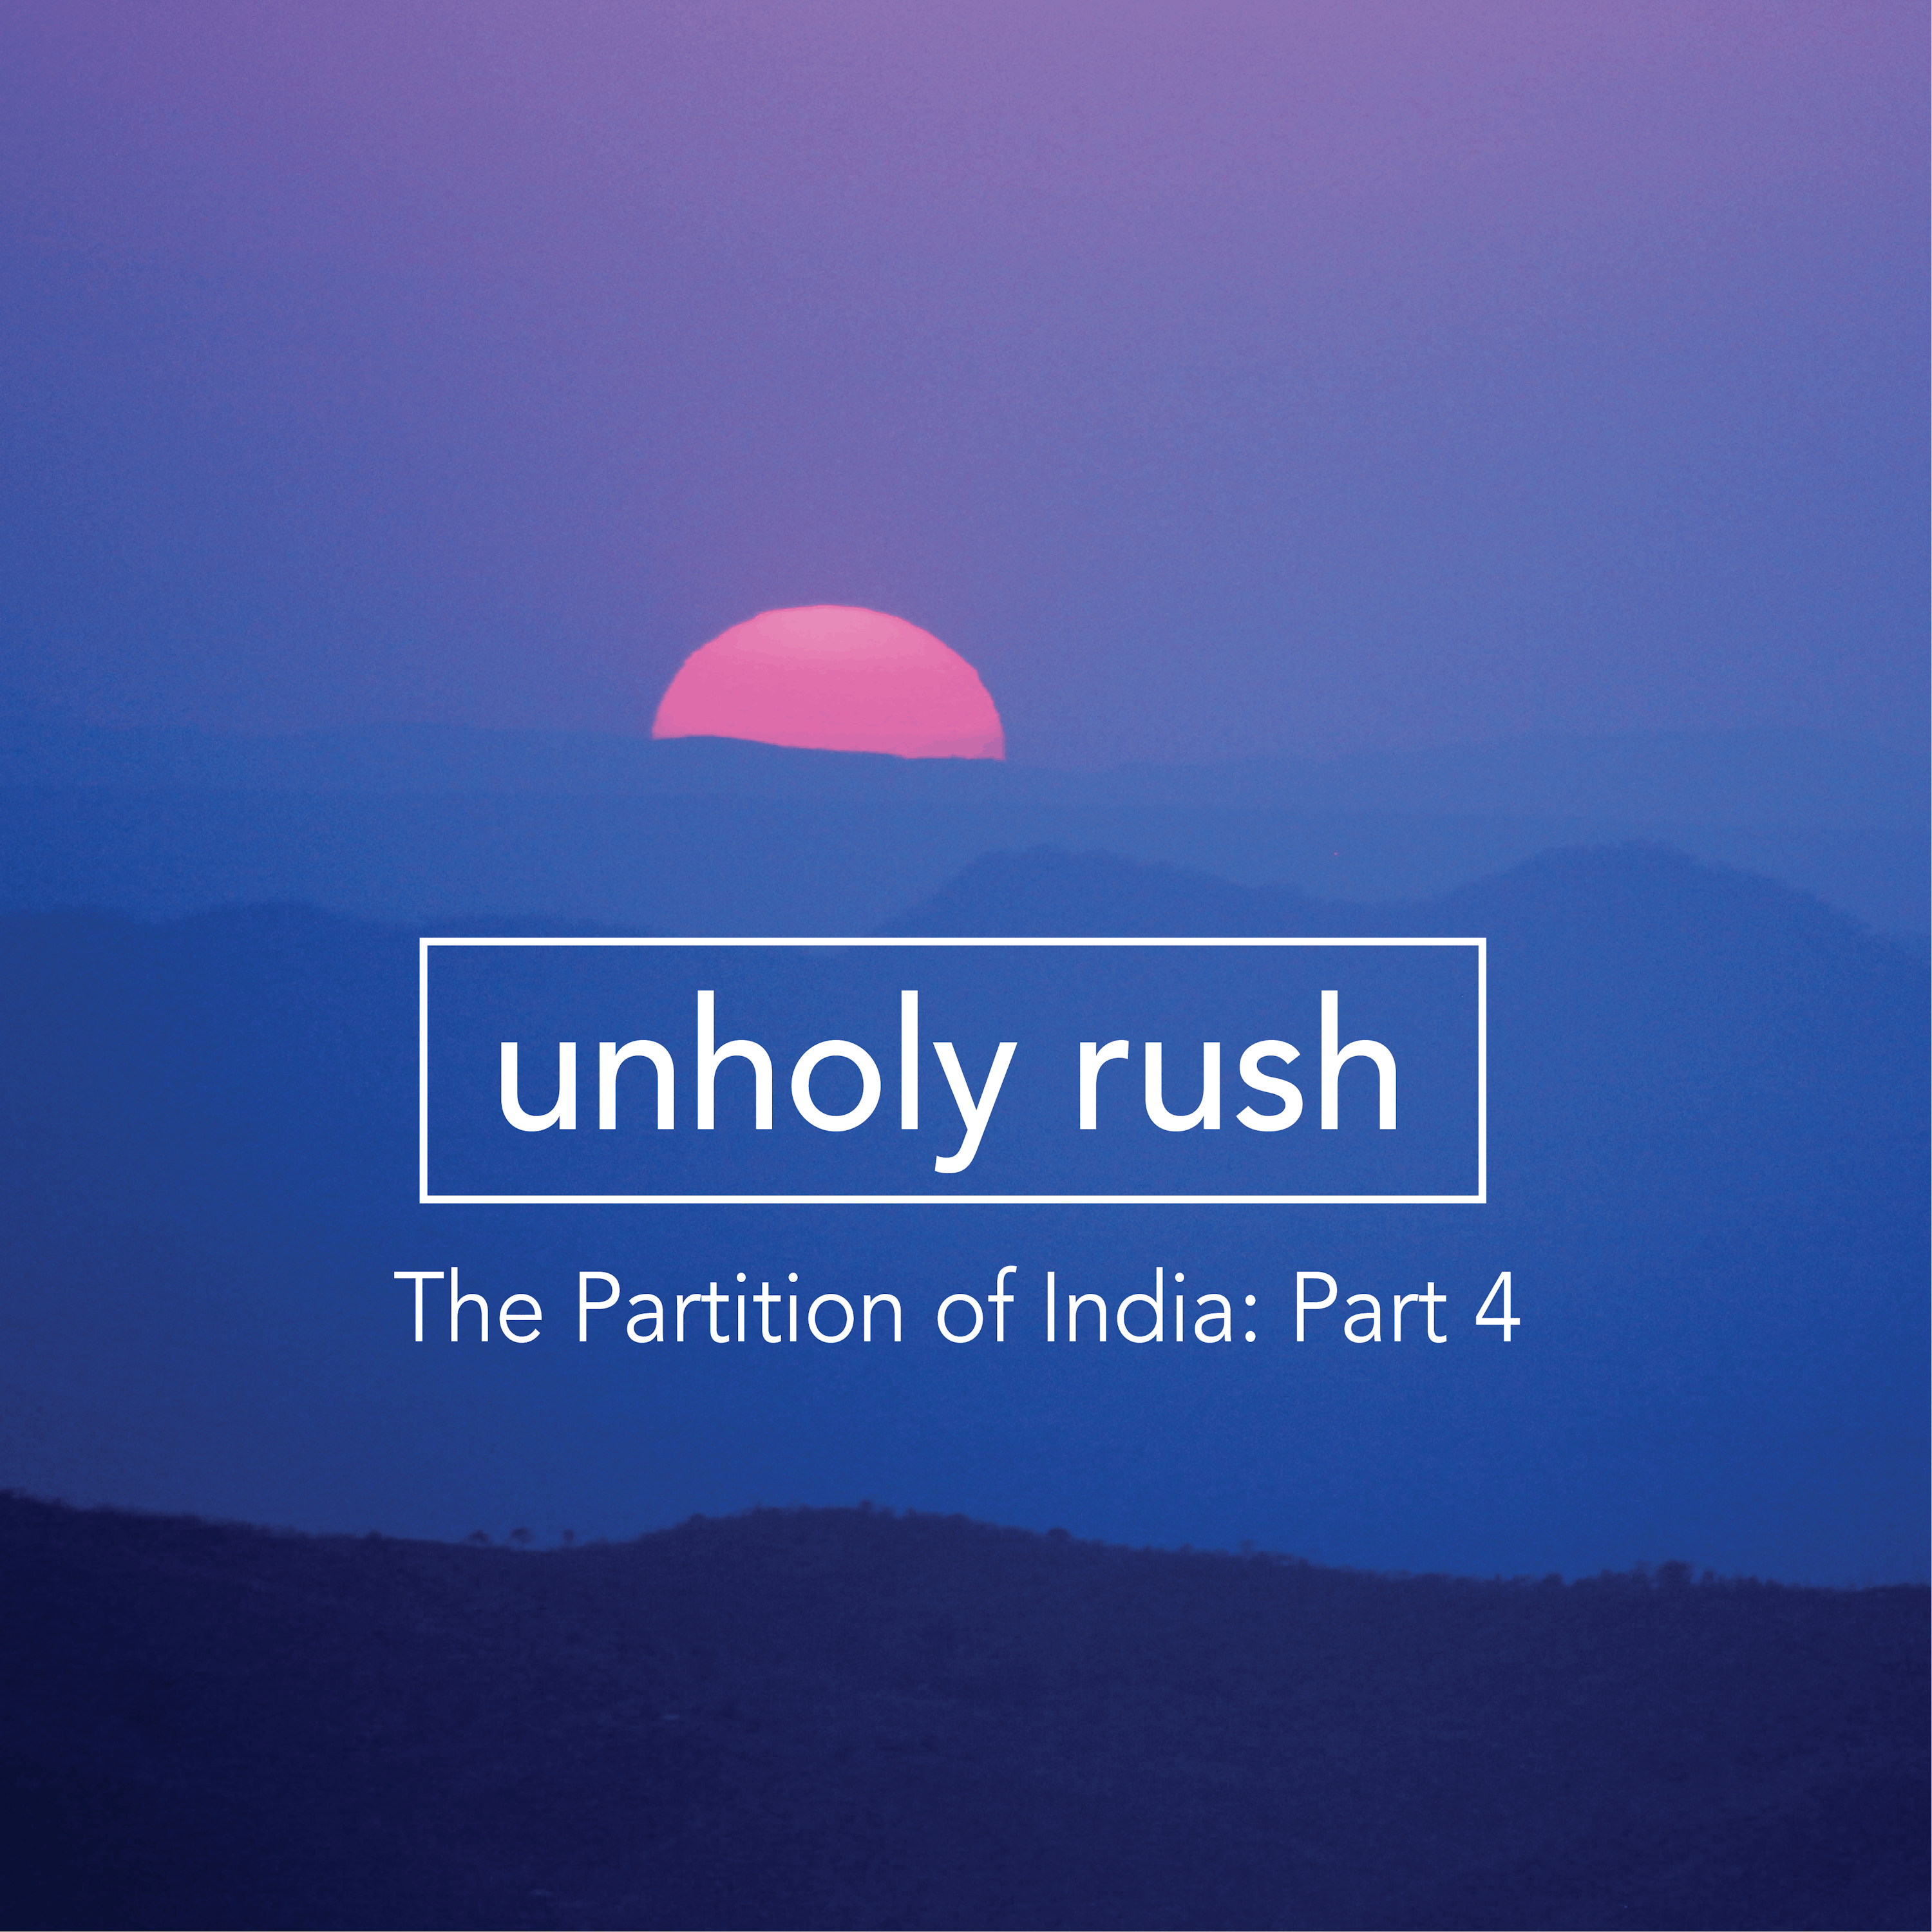 The Partition of India – Part 4: Unholy Rush Image